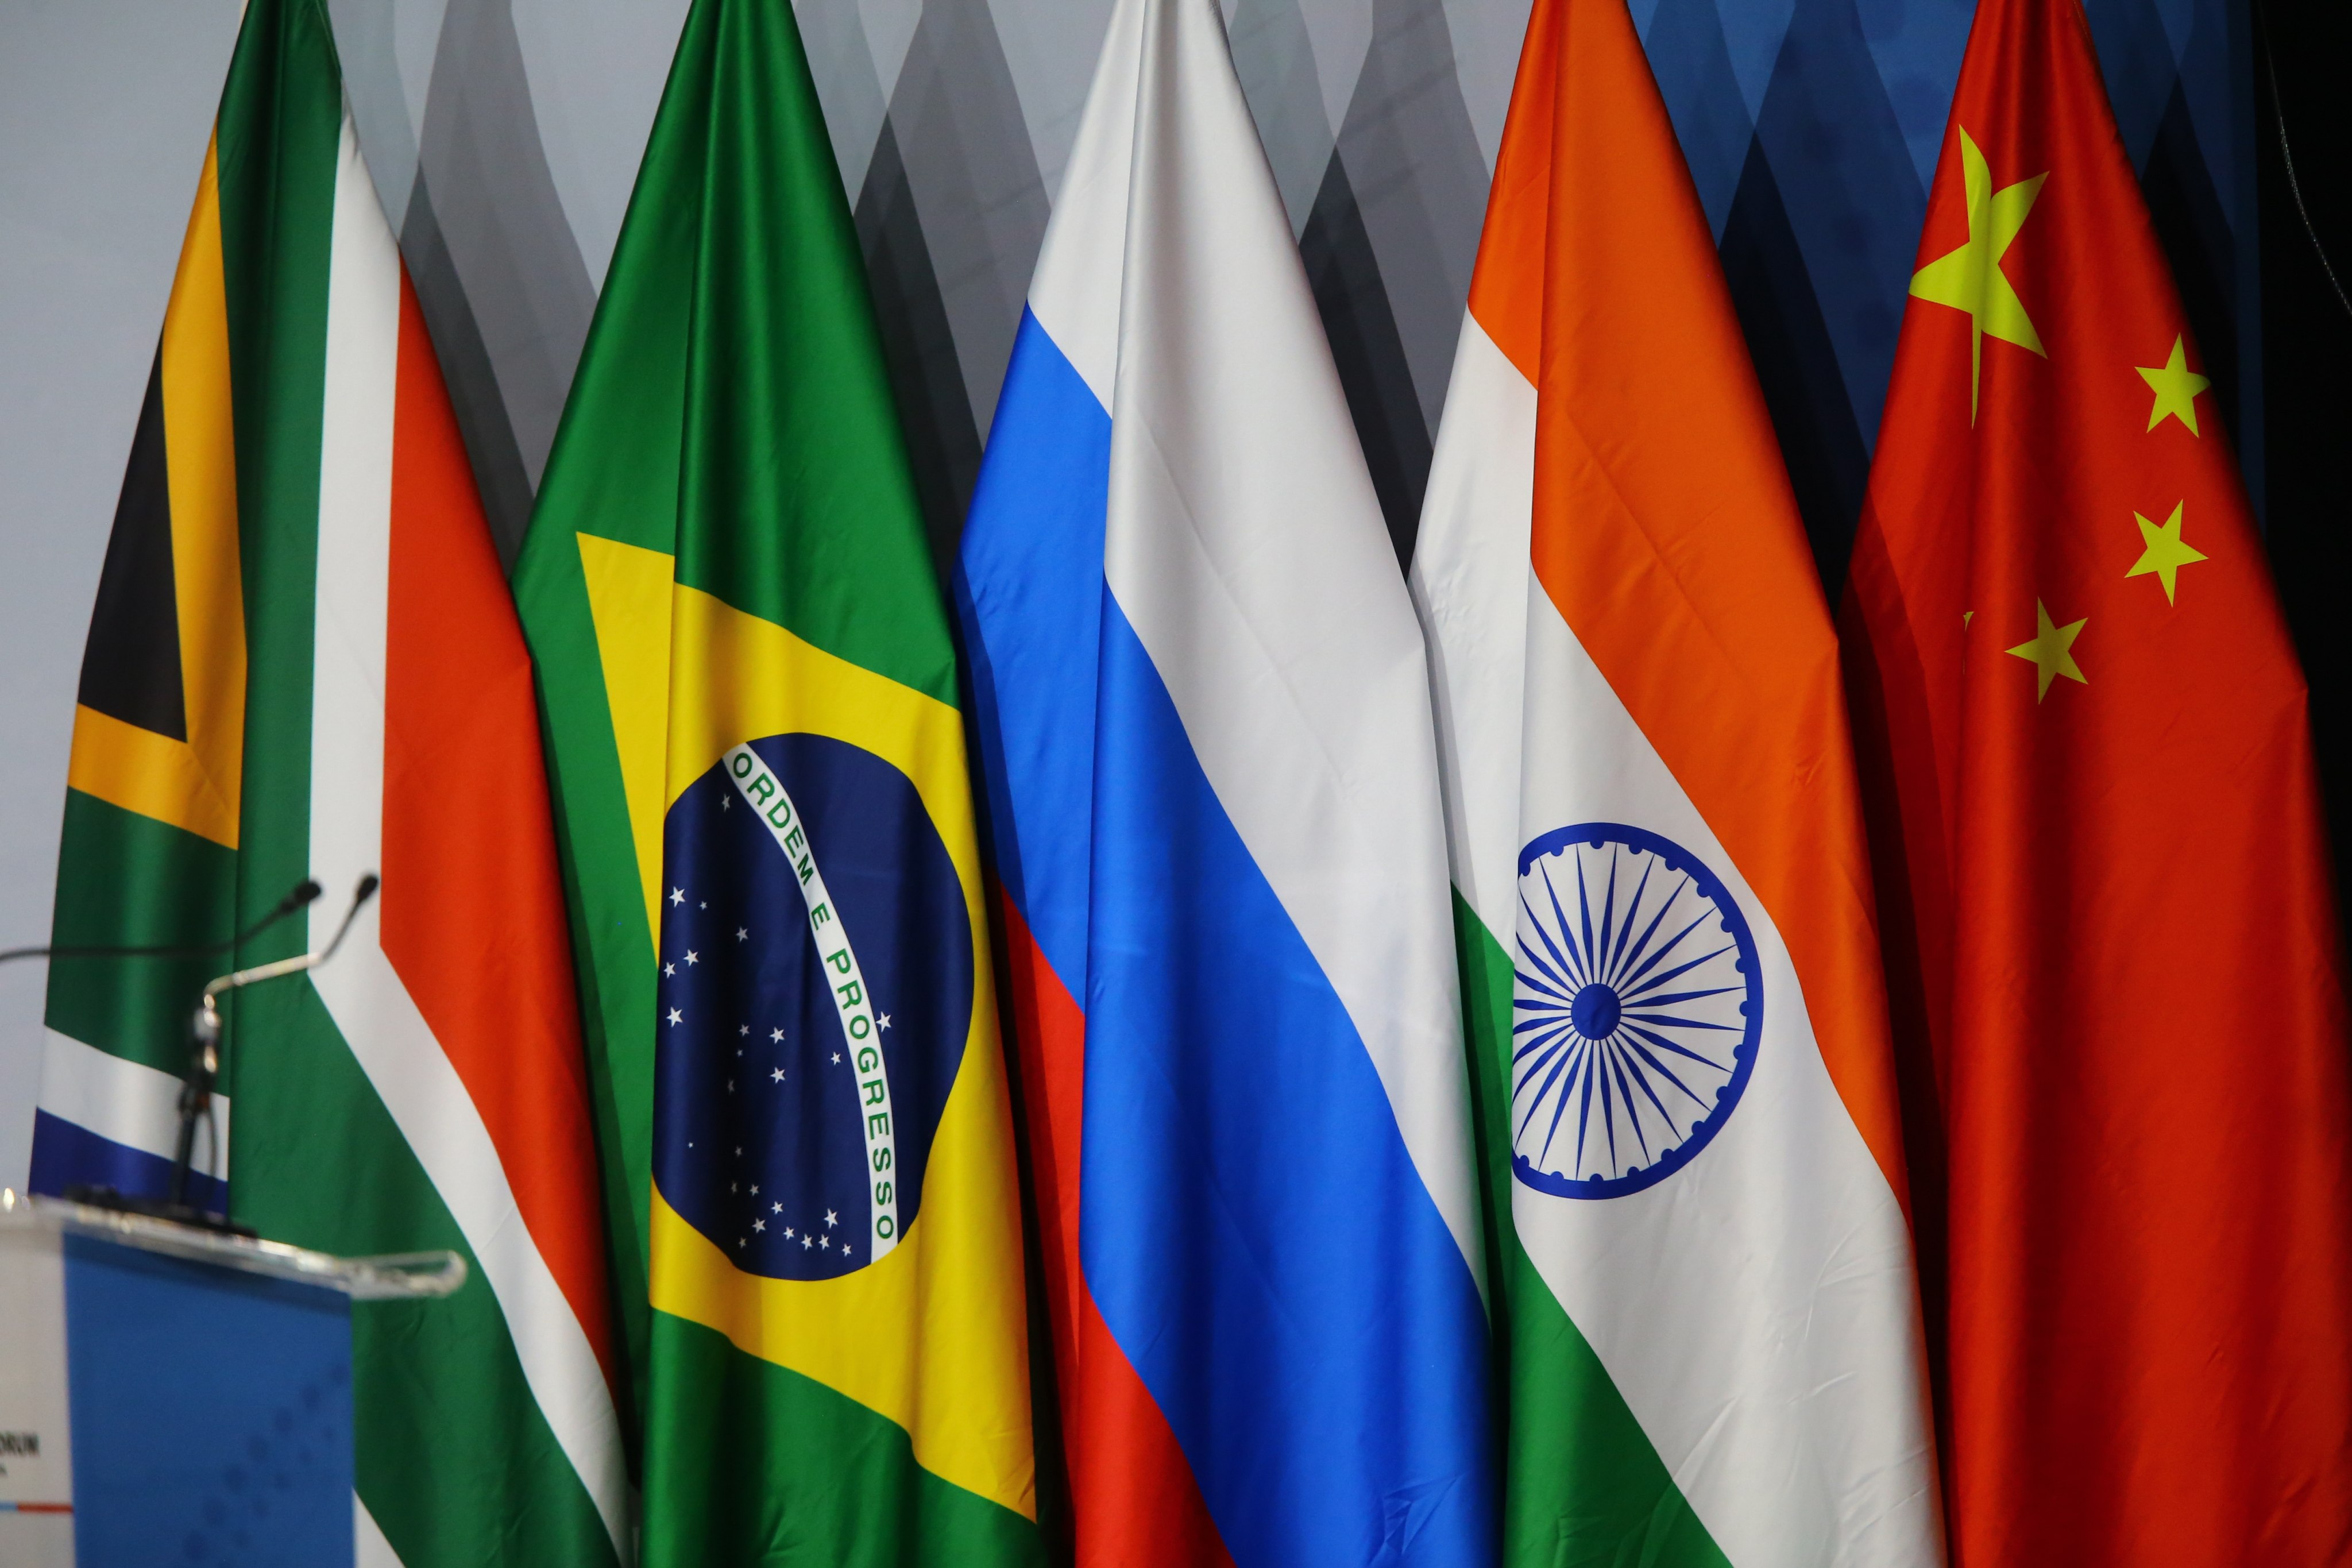 The Brics club is set to expand from five members to 11. Photo: EPA-EFE